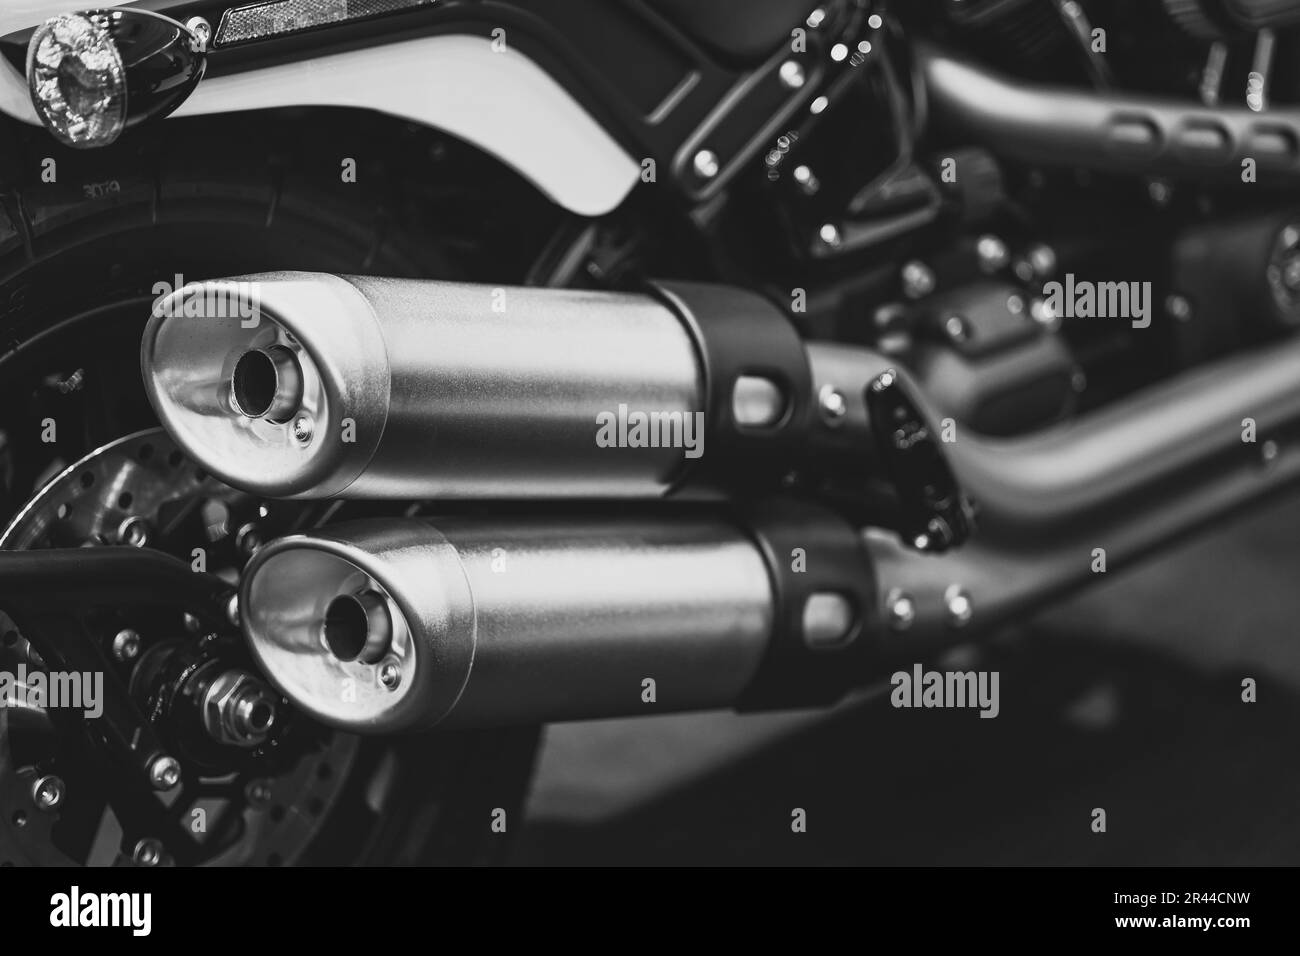 Motorcycle Closeup Customs Exhaust Pipes Big Muffler End Tip Dual Twin Out In Black And White Vintage Tone Stock Photo